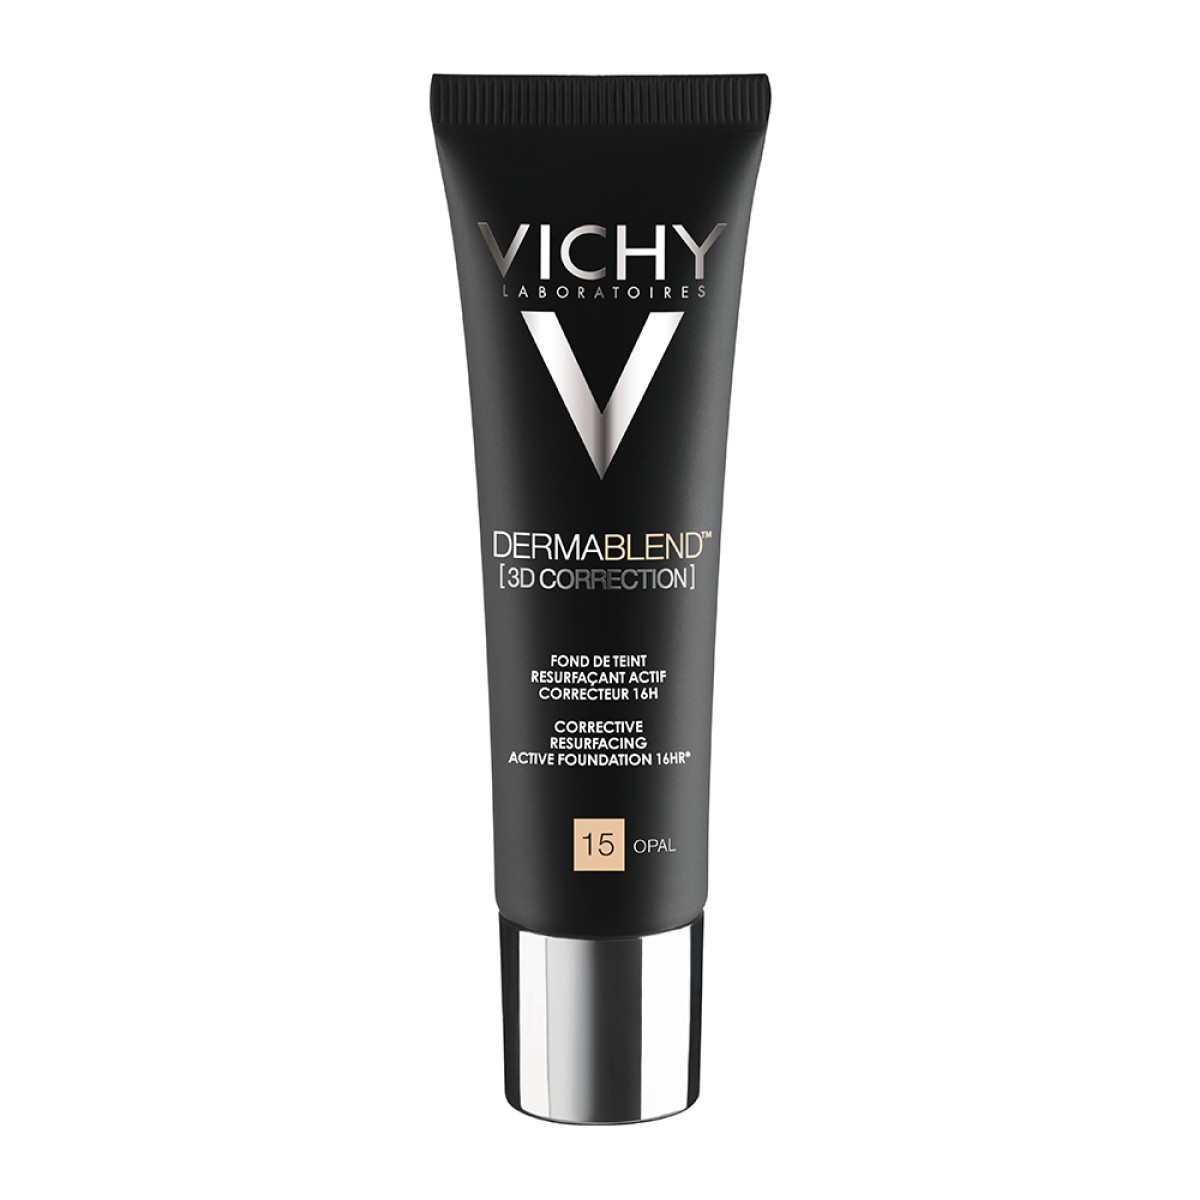 Vichy | Dermablend 3D Correction Make-up 15 Opal | 30ml